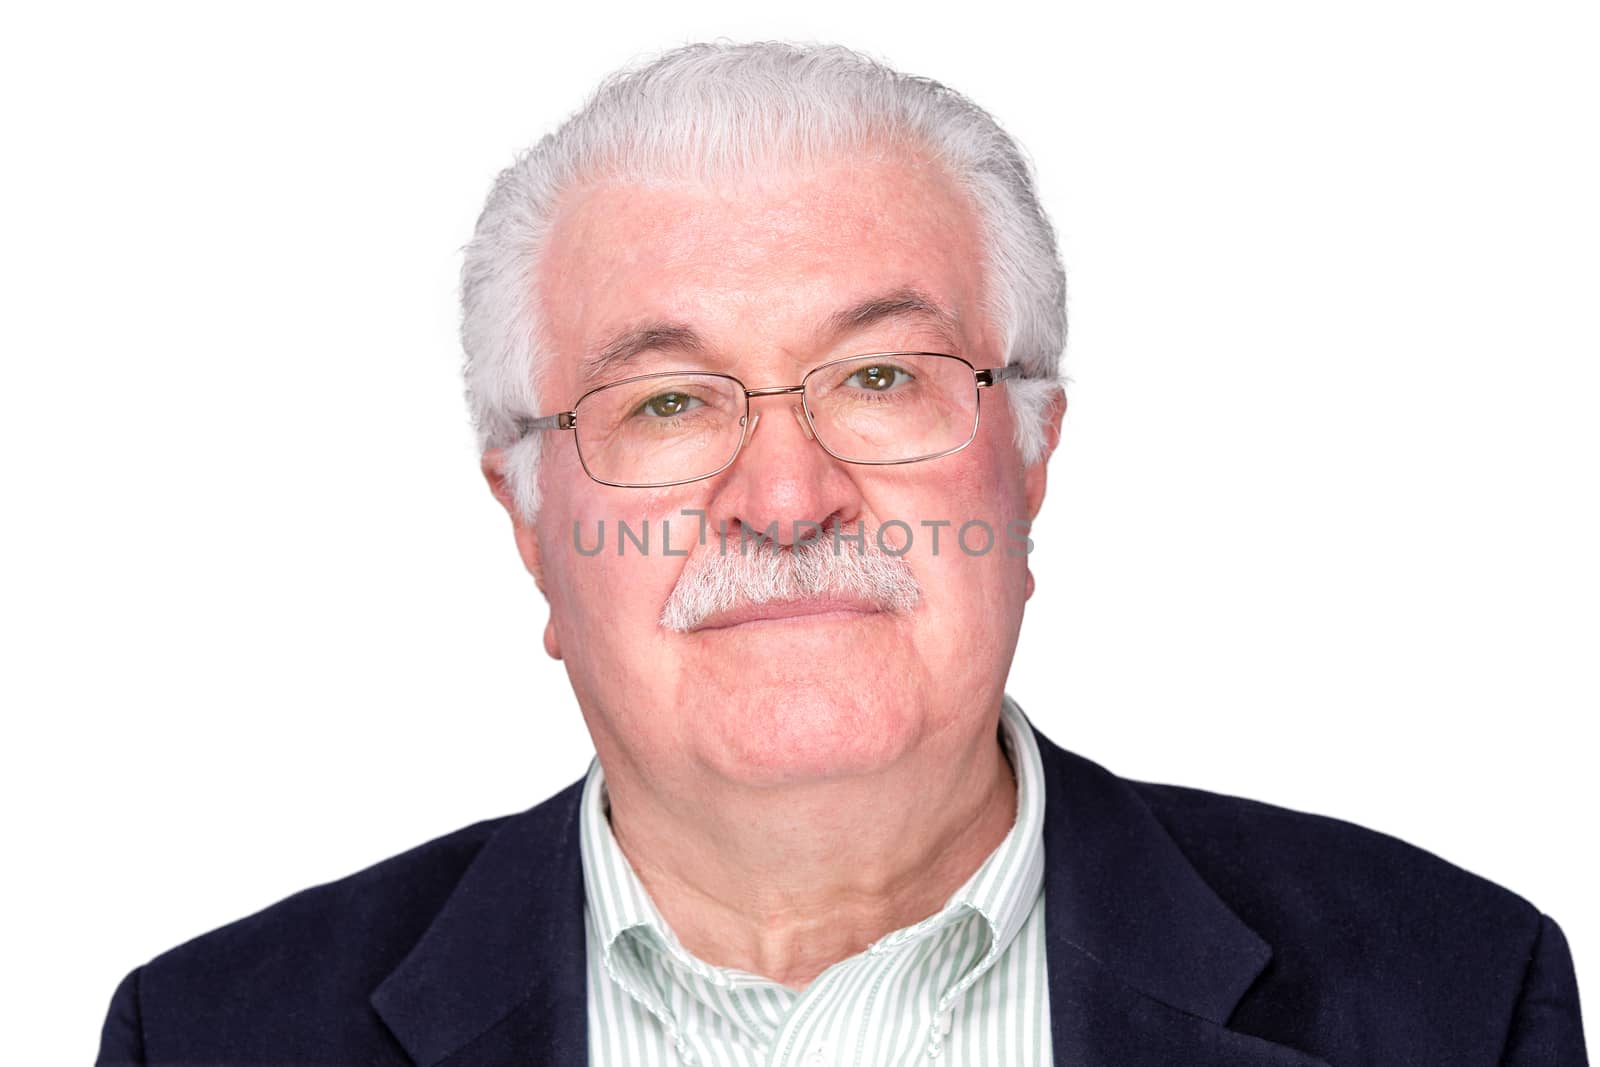 Head and Shoulder Shot of a Serious Senior Man with White Hair Wearing Eyeglasses and Looking at the Camera. Isolated on White Background.